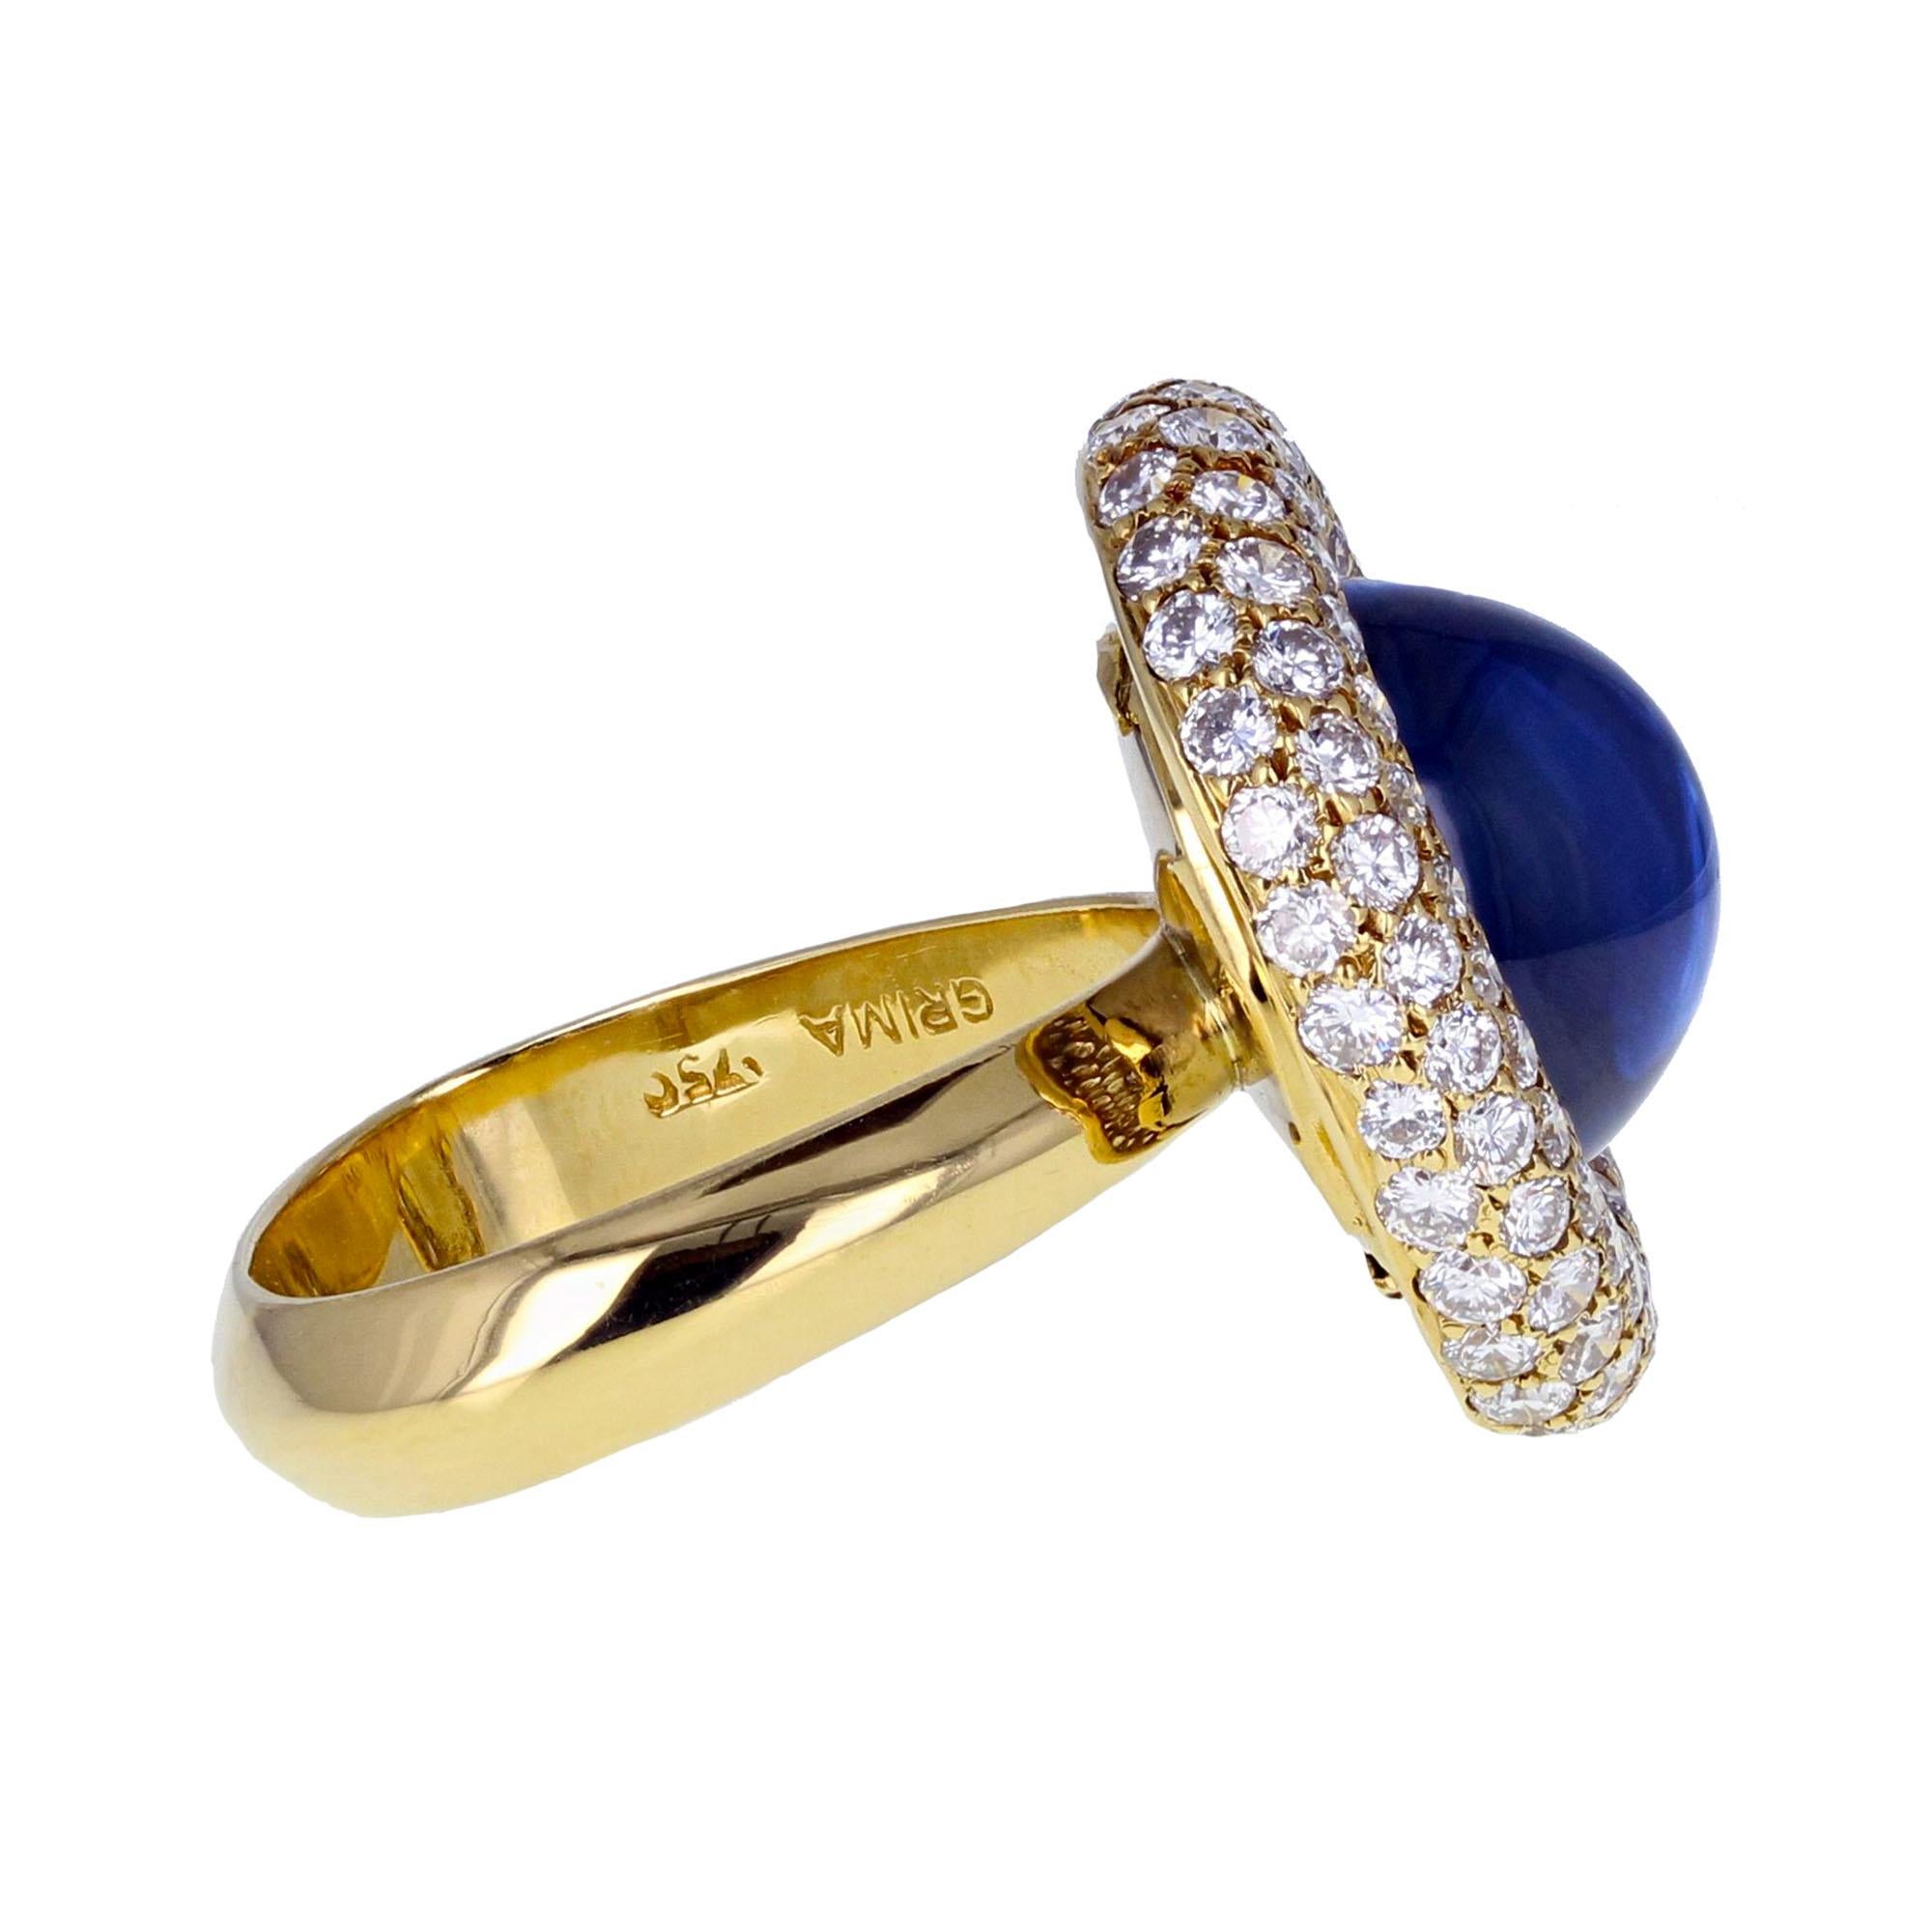 Grima Gold Sugarloaf Cabochon Sapphire Pavé Diamond Cocktail Ring For Sale 3